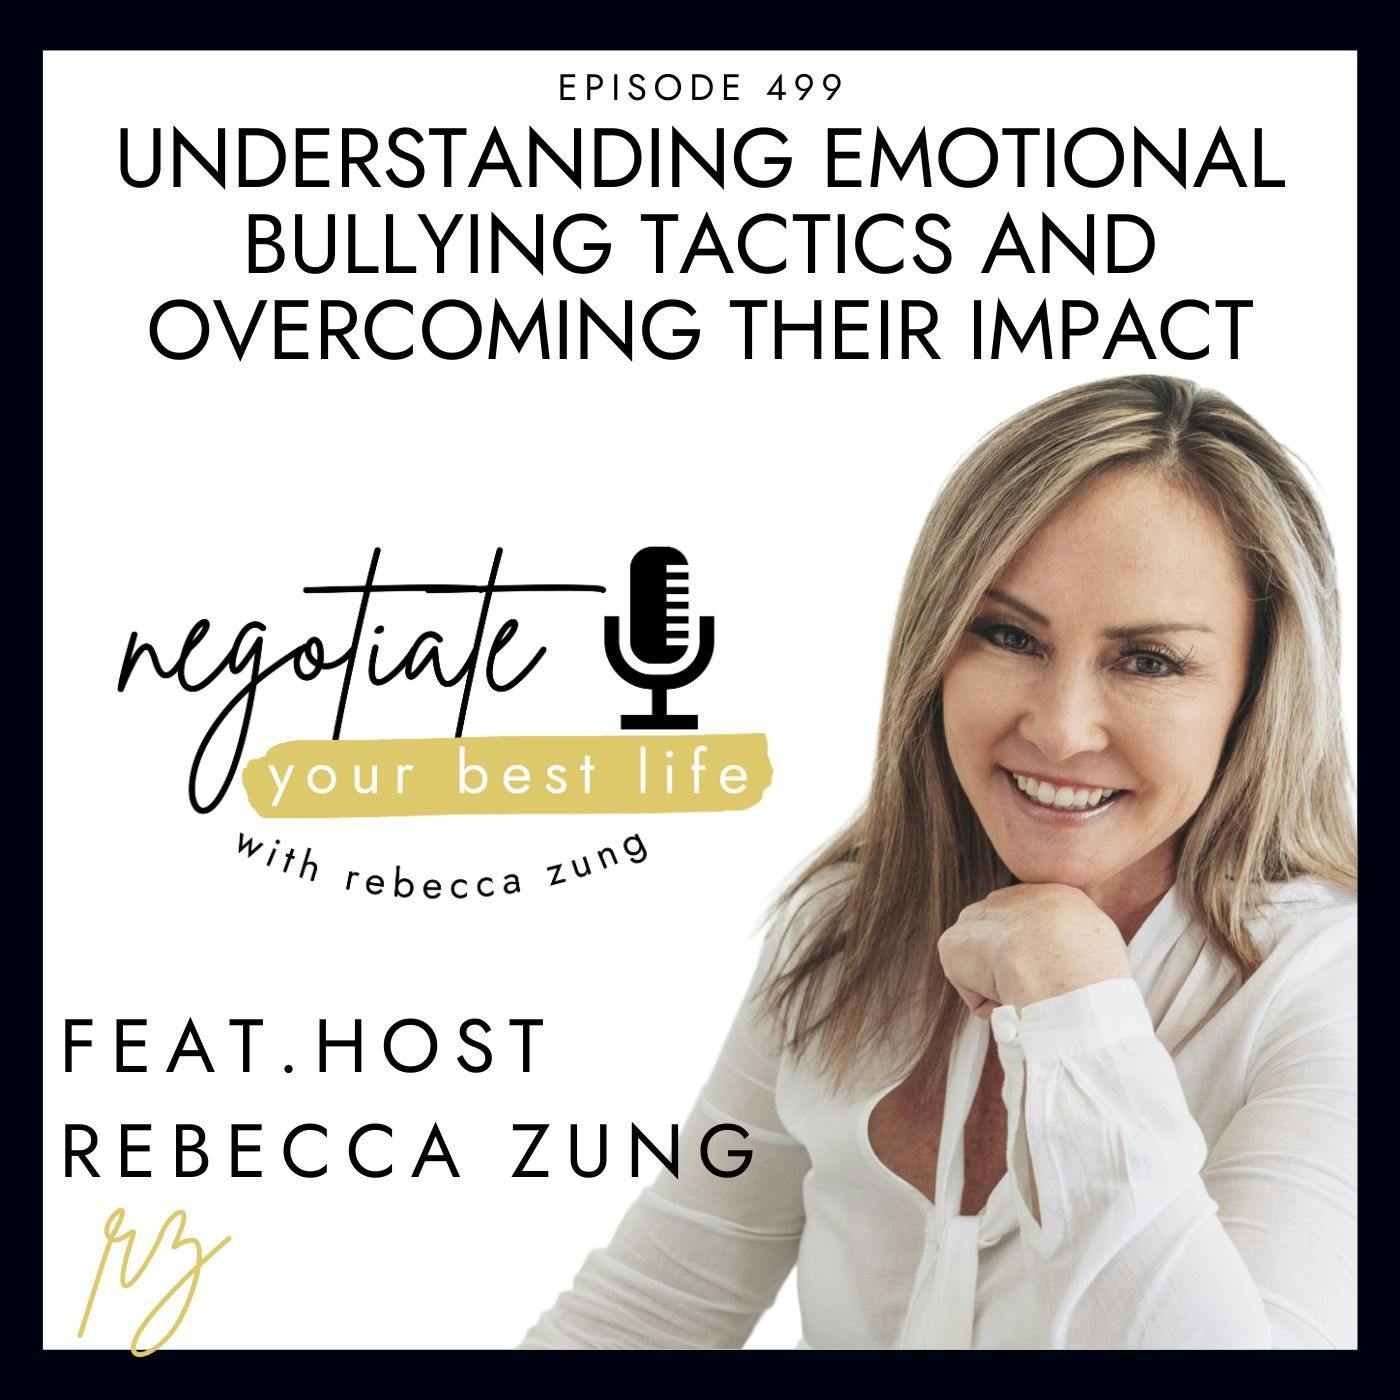 Understanding Emotional Bullying Tactics and Overcoming Their Impact with Rebecca Zung on Negotiate Your Best Life #499